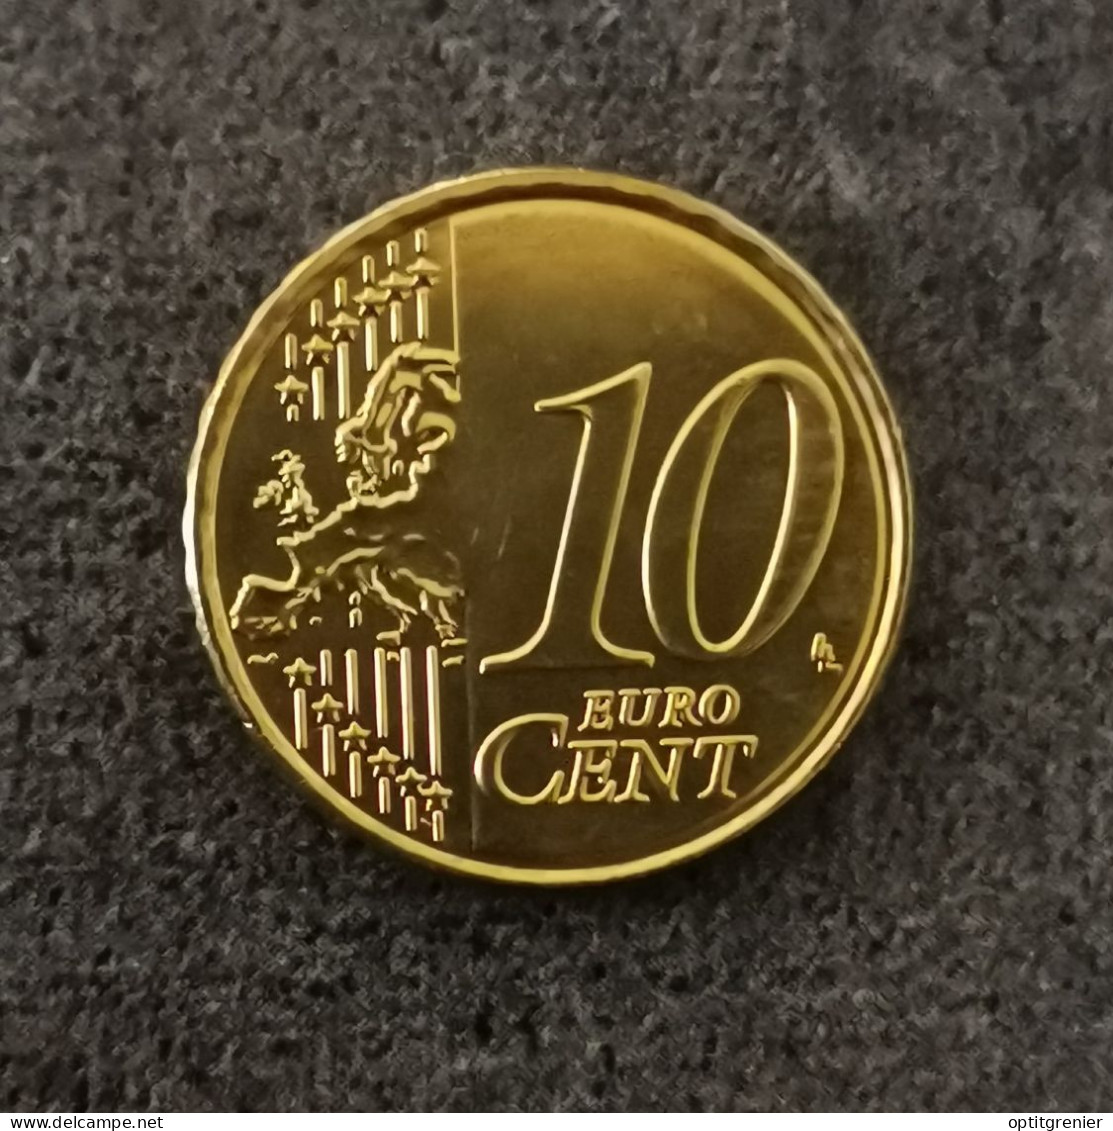 LOT 50 & 20 & 10 CENTS EURO 2020 CHYPRE / CYPRUS - Cipro